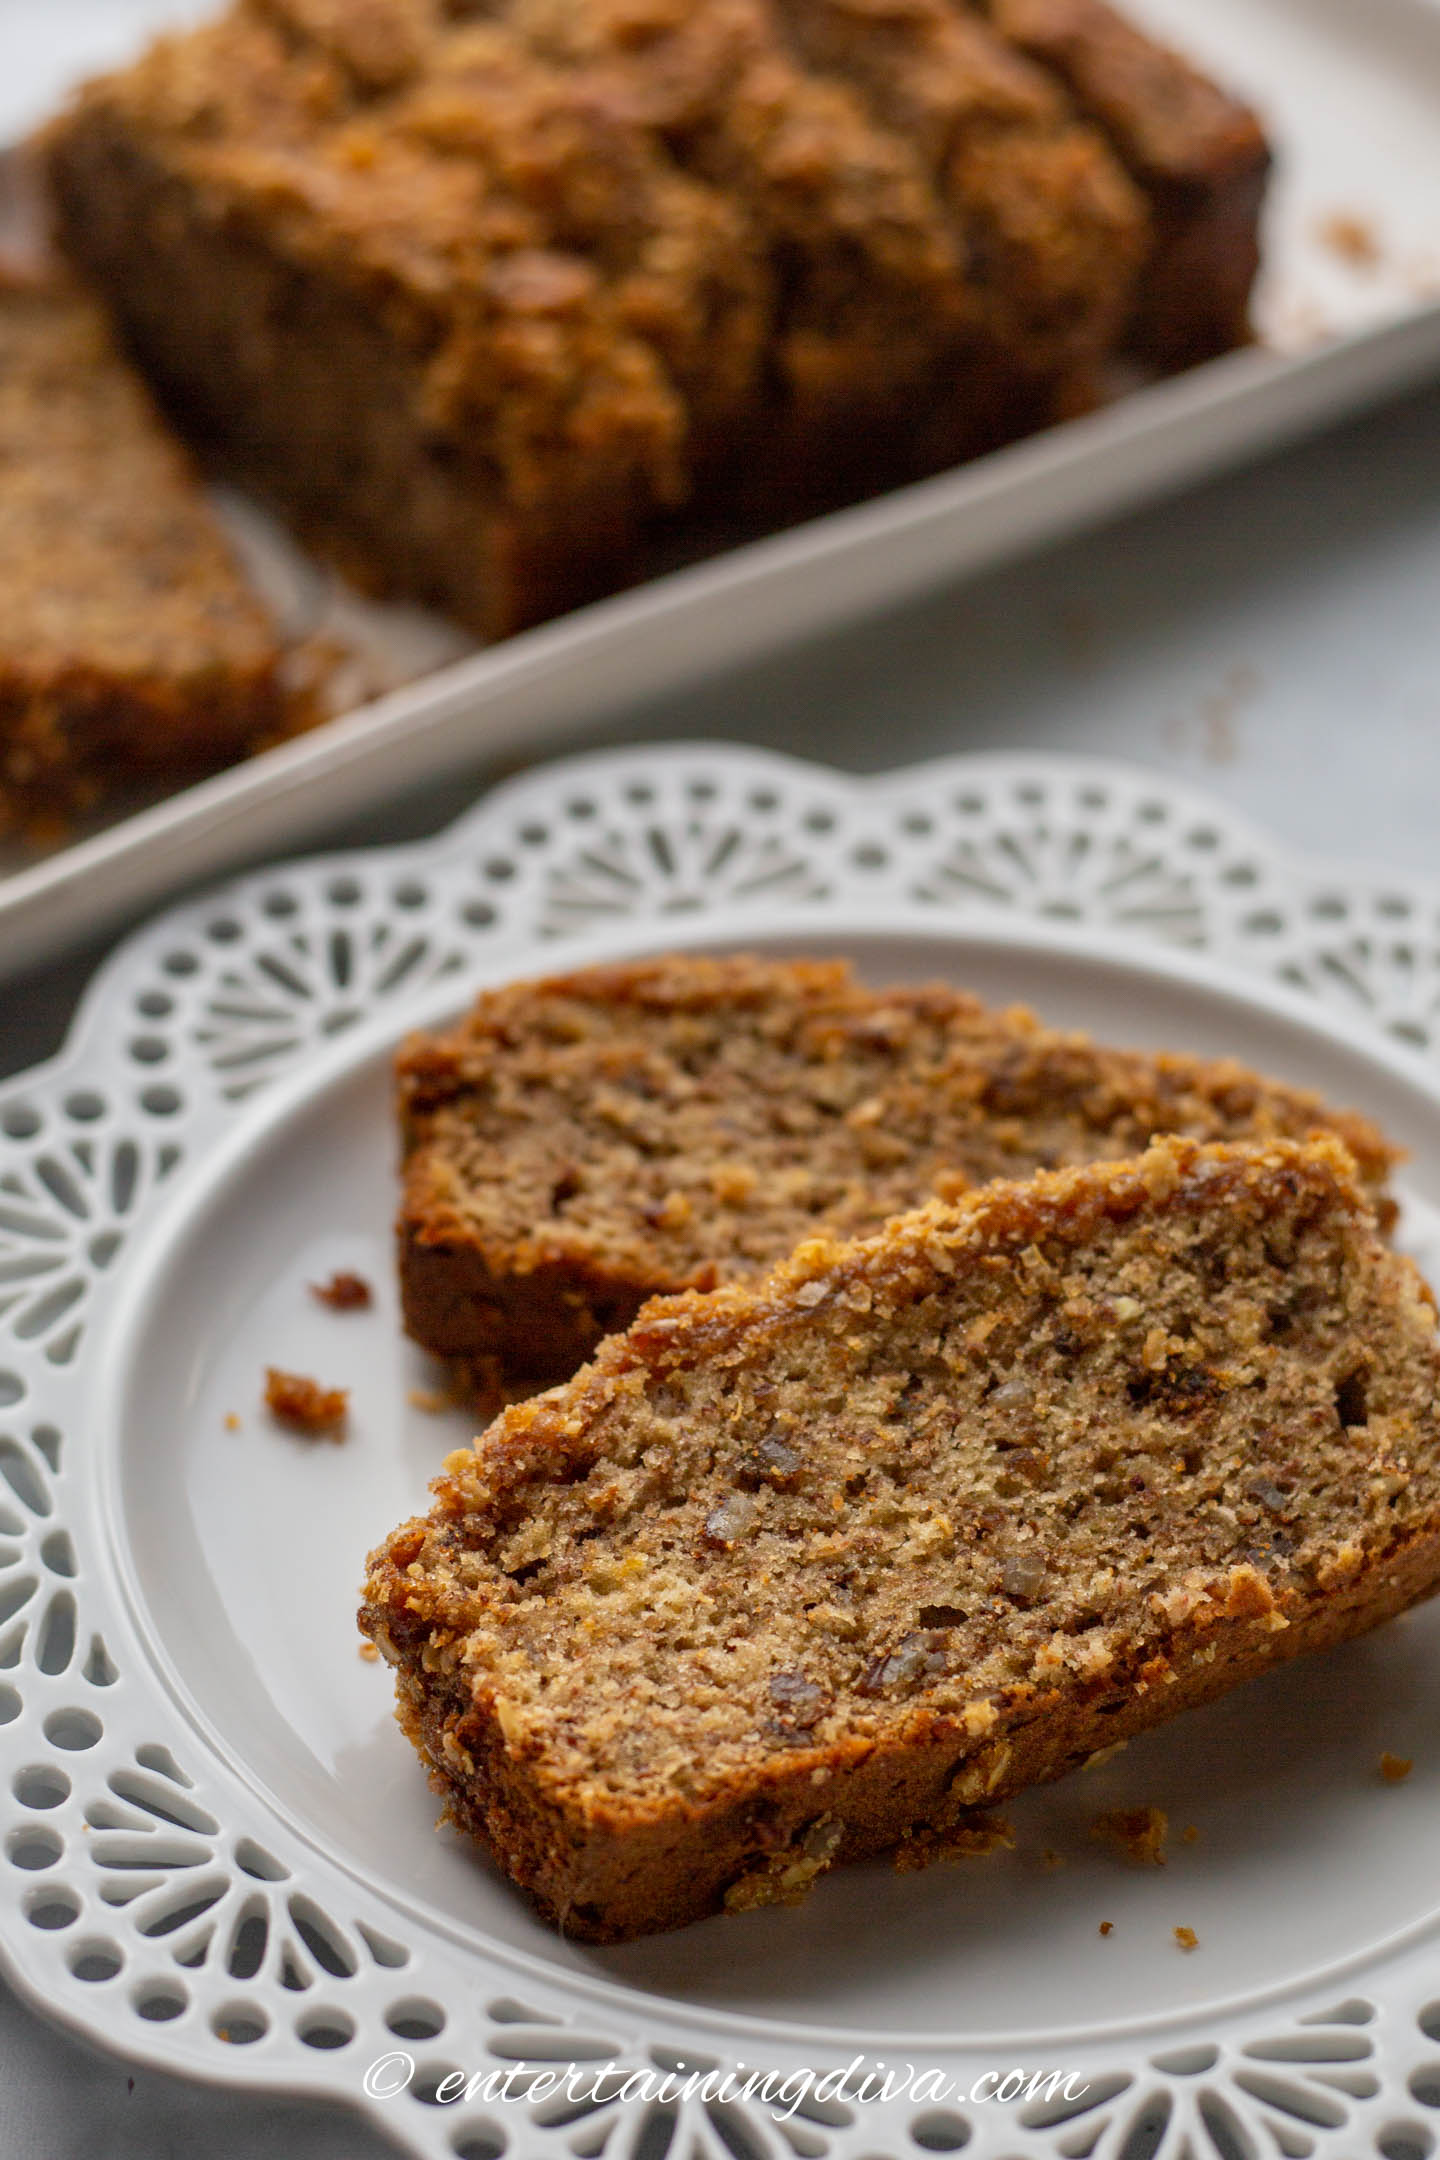 Two slices of classic banana nut bread with streusel topping on a plate